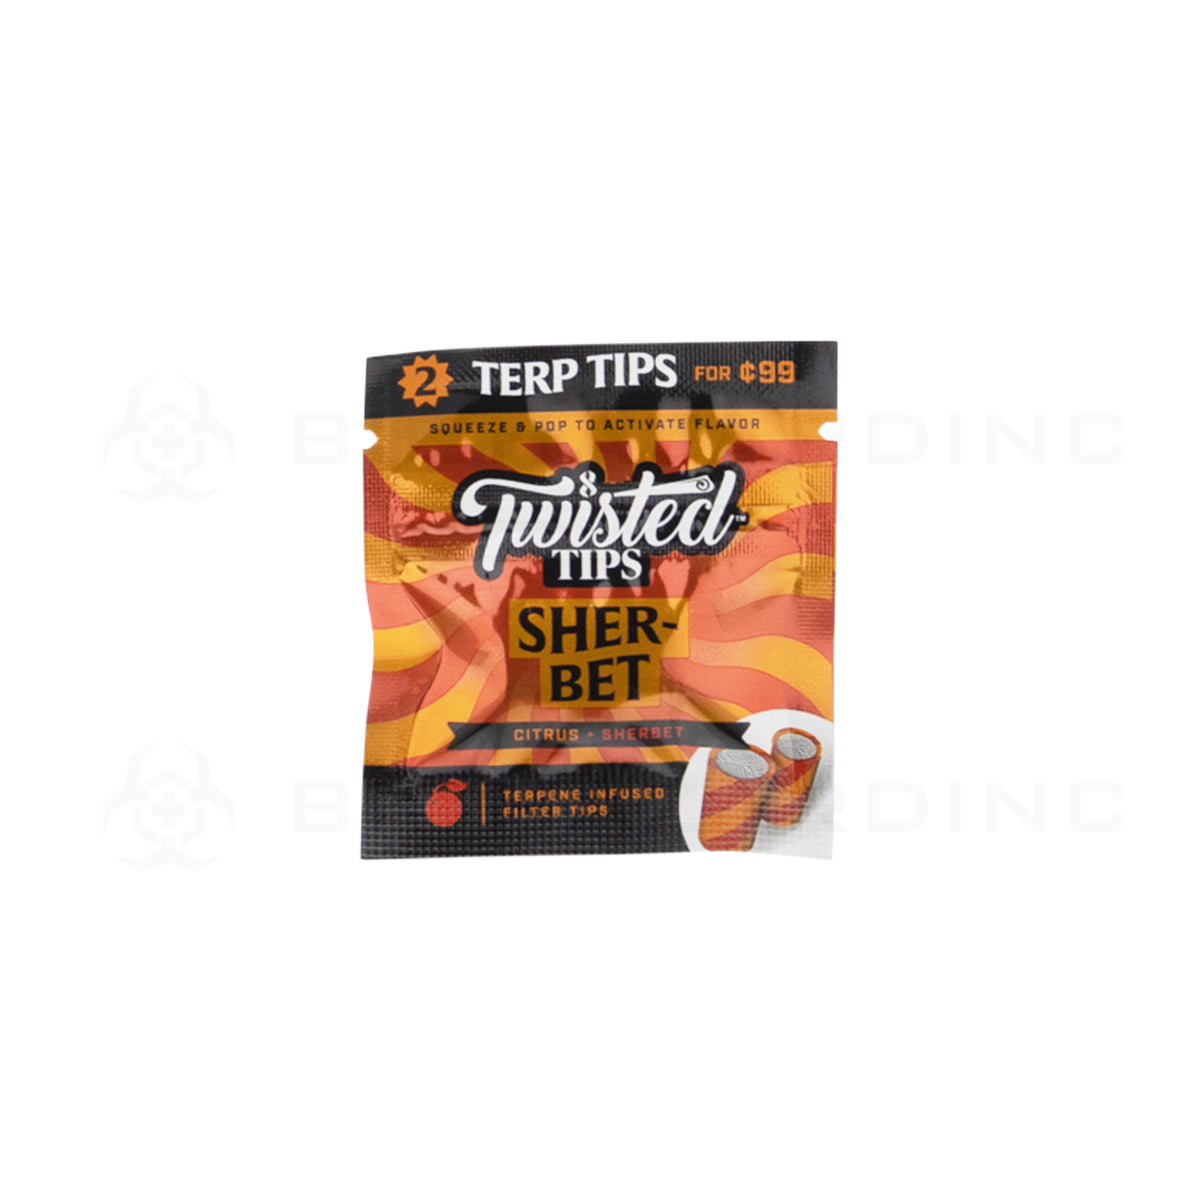 Twisted Tips | 'Retail Display' Terpene Infused 2 Packs | 24 Count Paper Tips Twisted Hemp Sherbet  